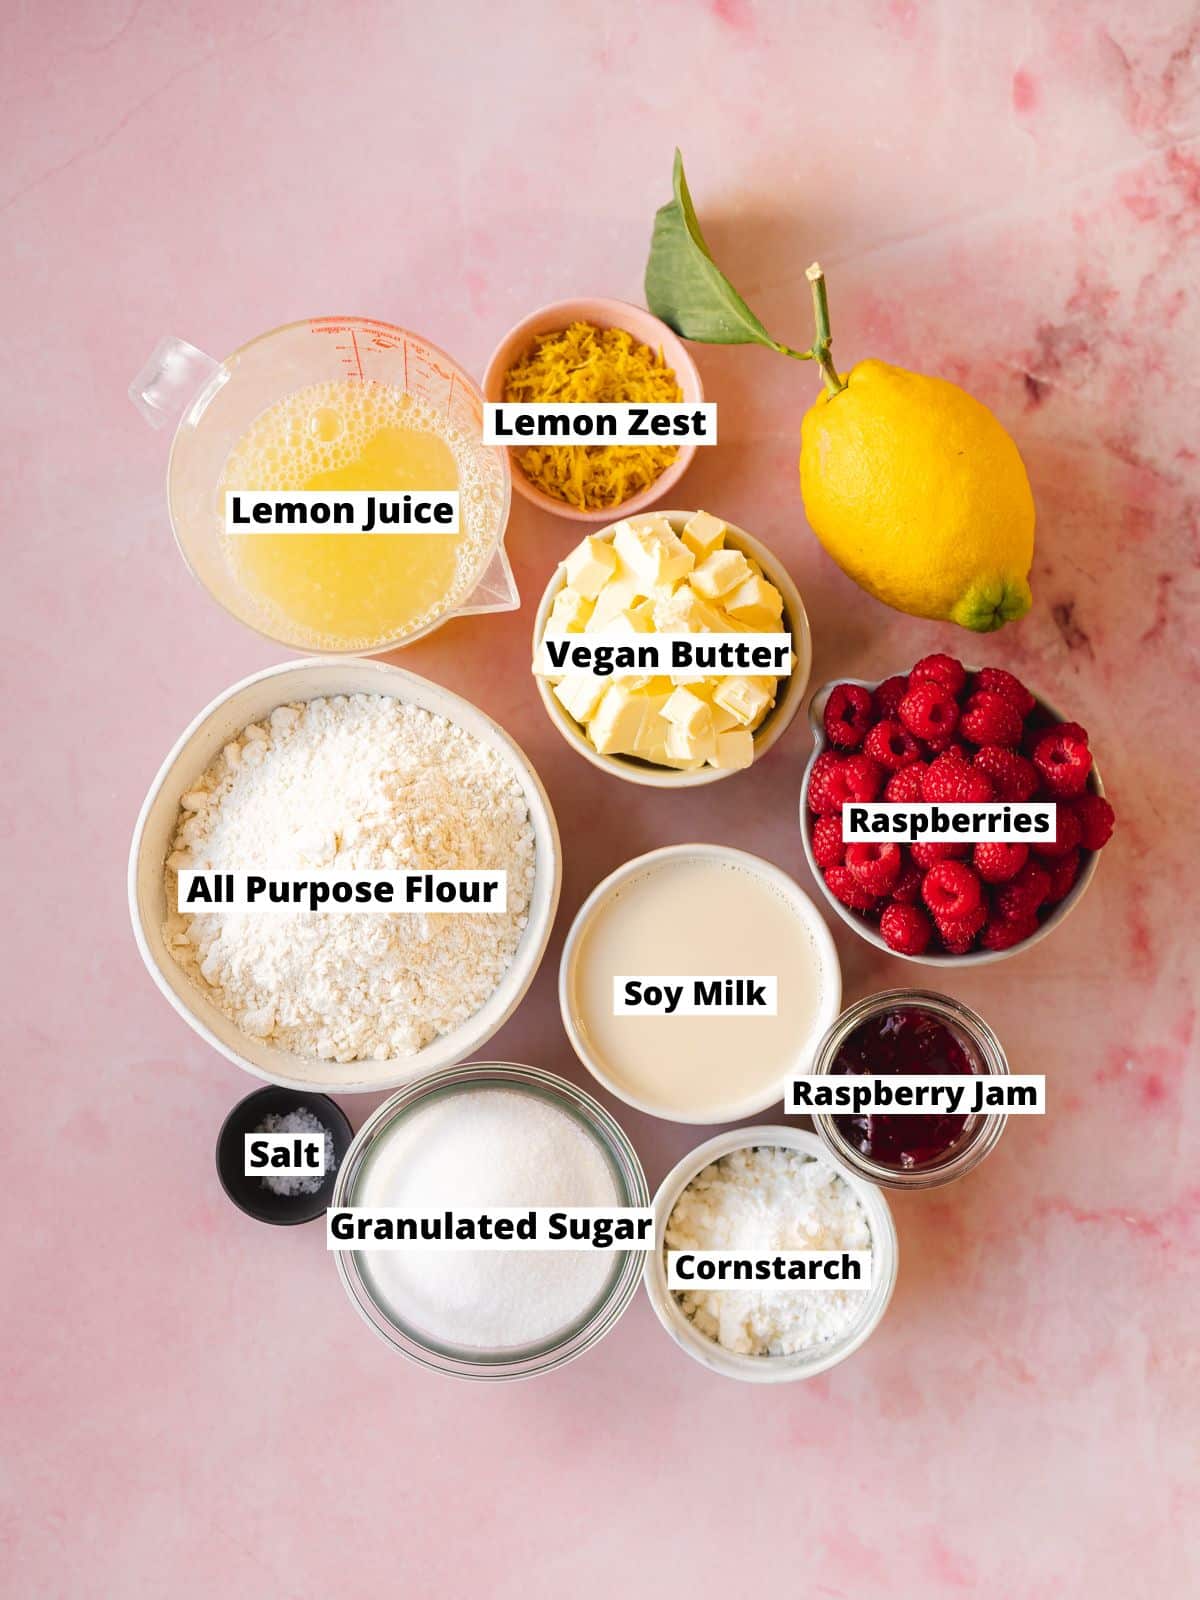 Ingredients needed for making plant-based mini lemon tarts measured out into bowls on a pink background with text overlay.